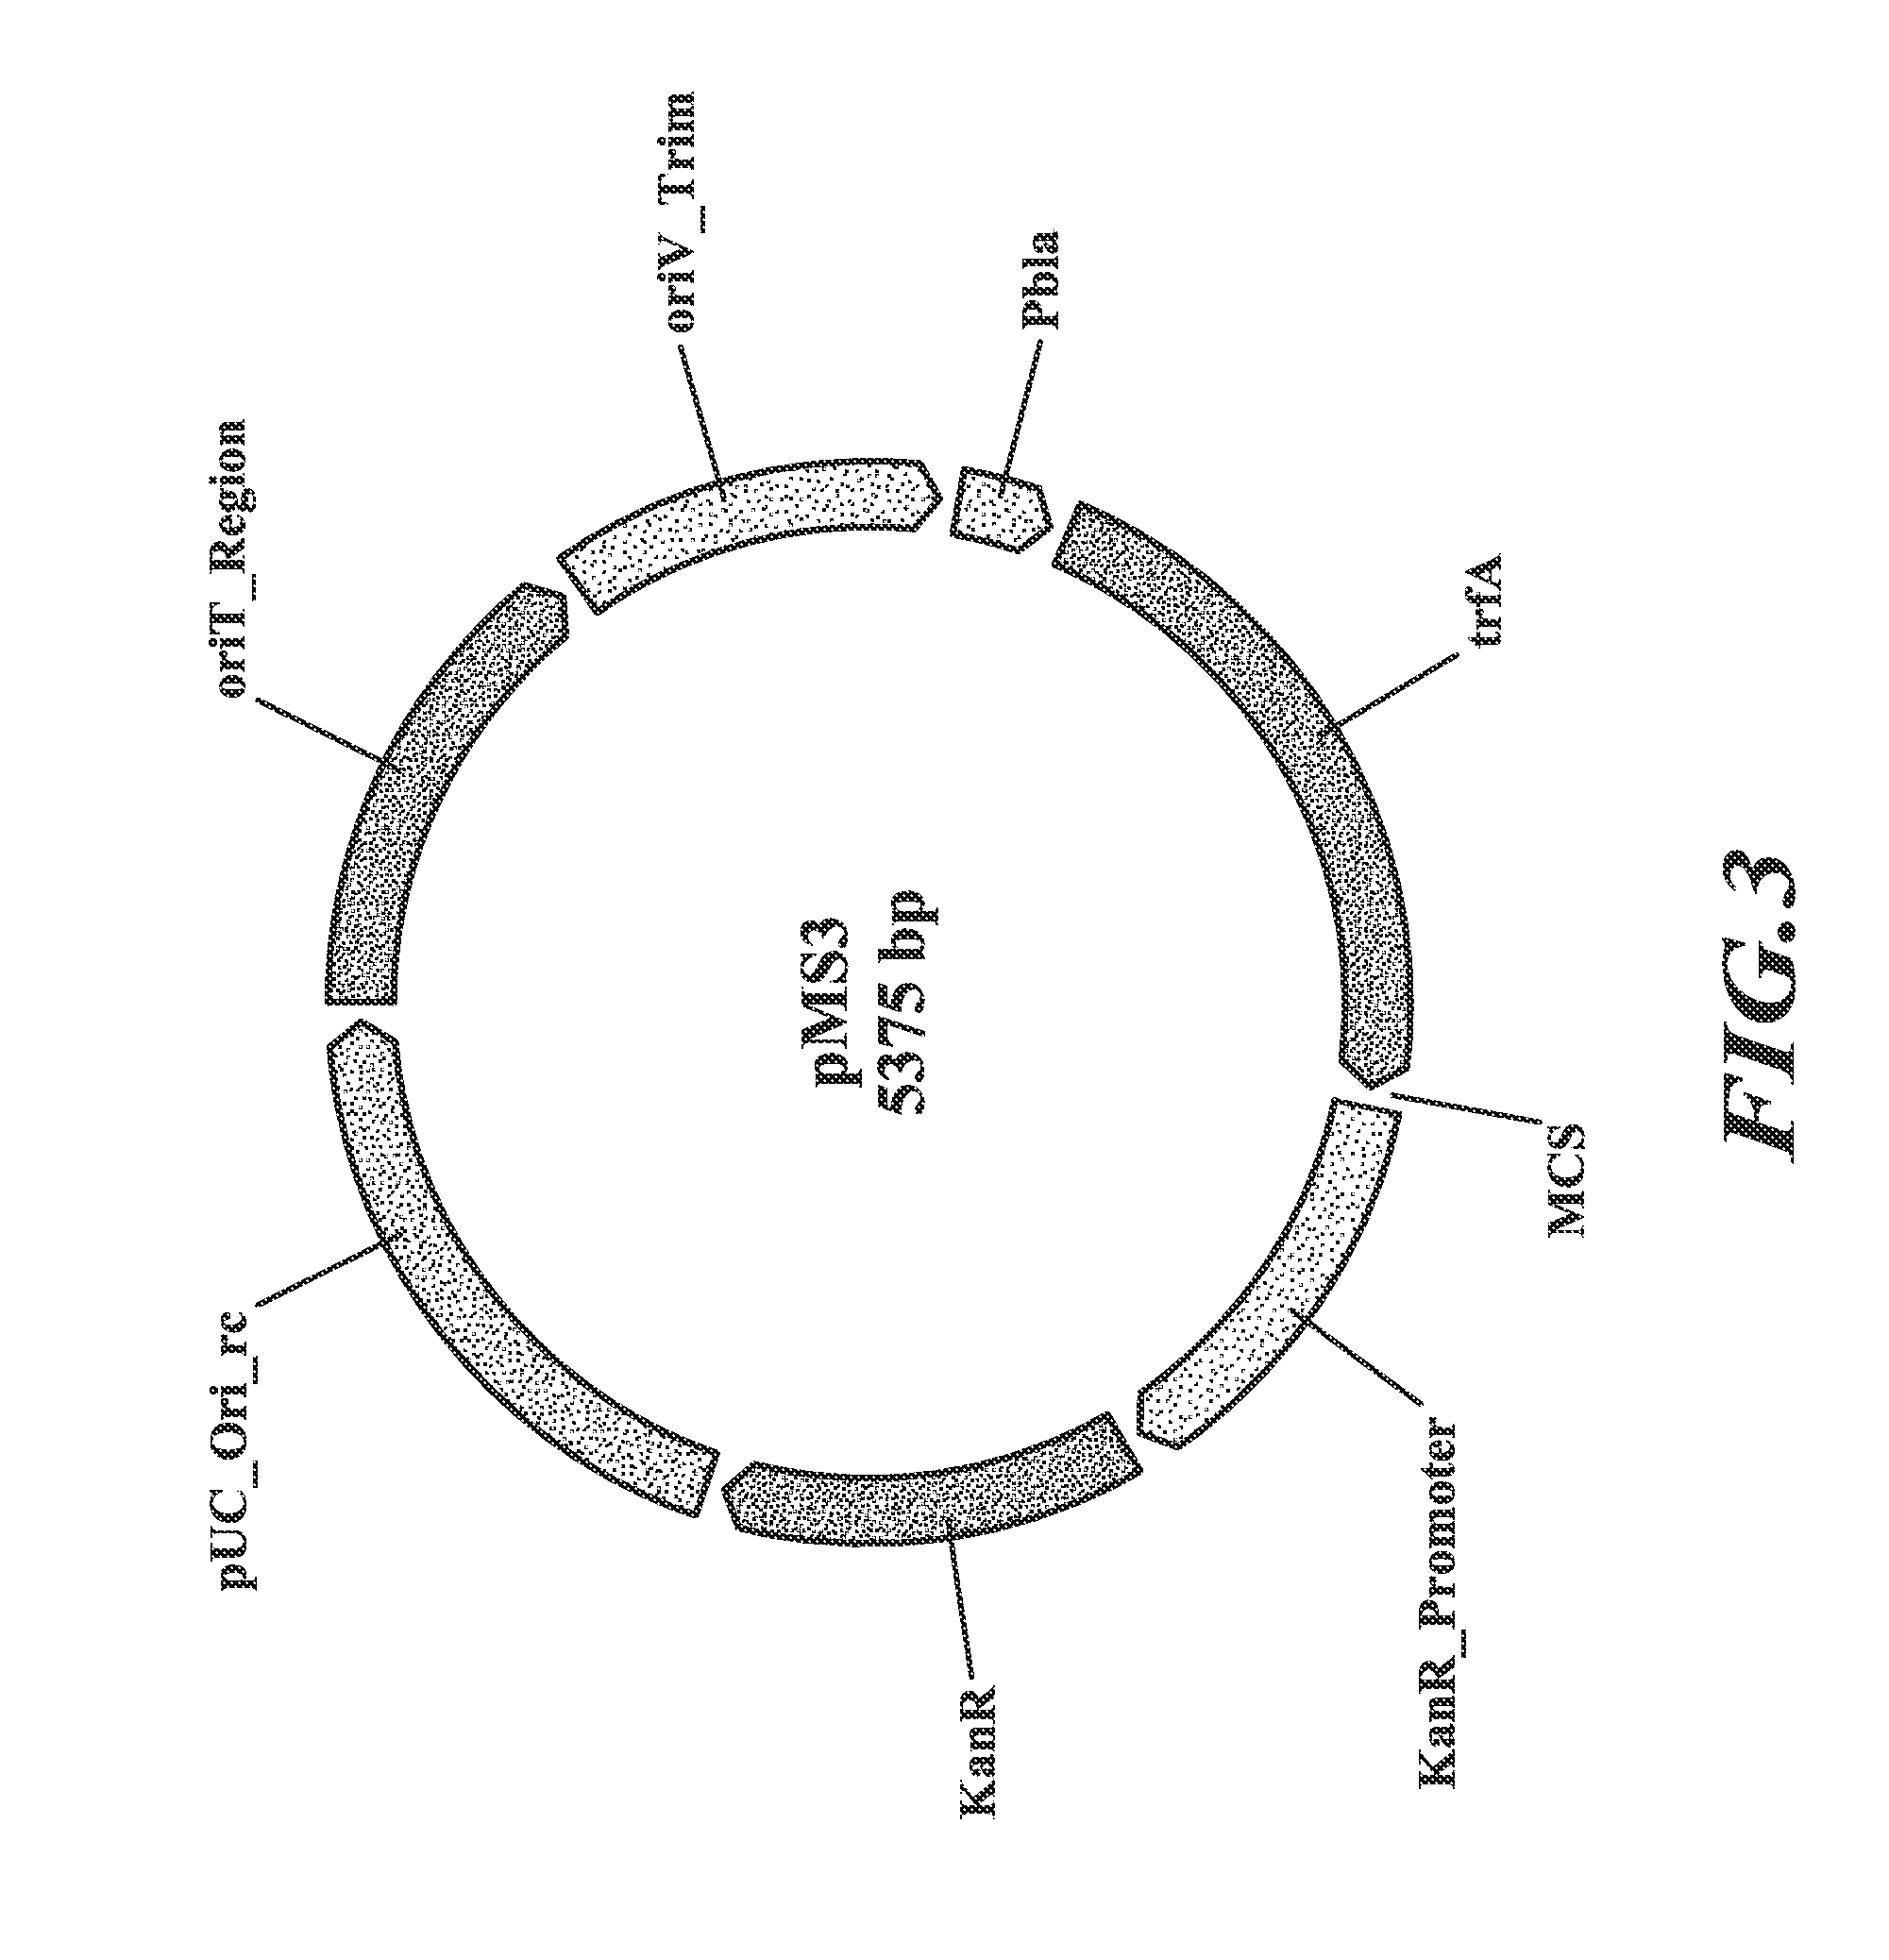 Compositions and methods for biological production of lactate from c1 compounds using lactate dehydrogenase transformants